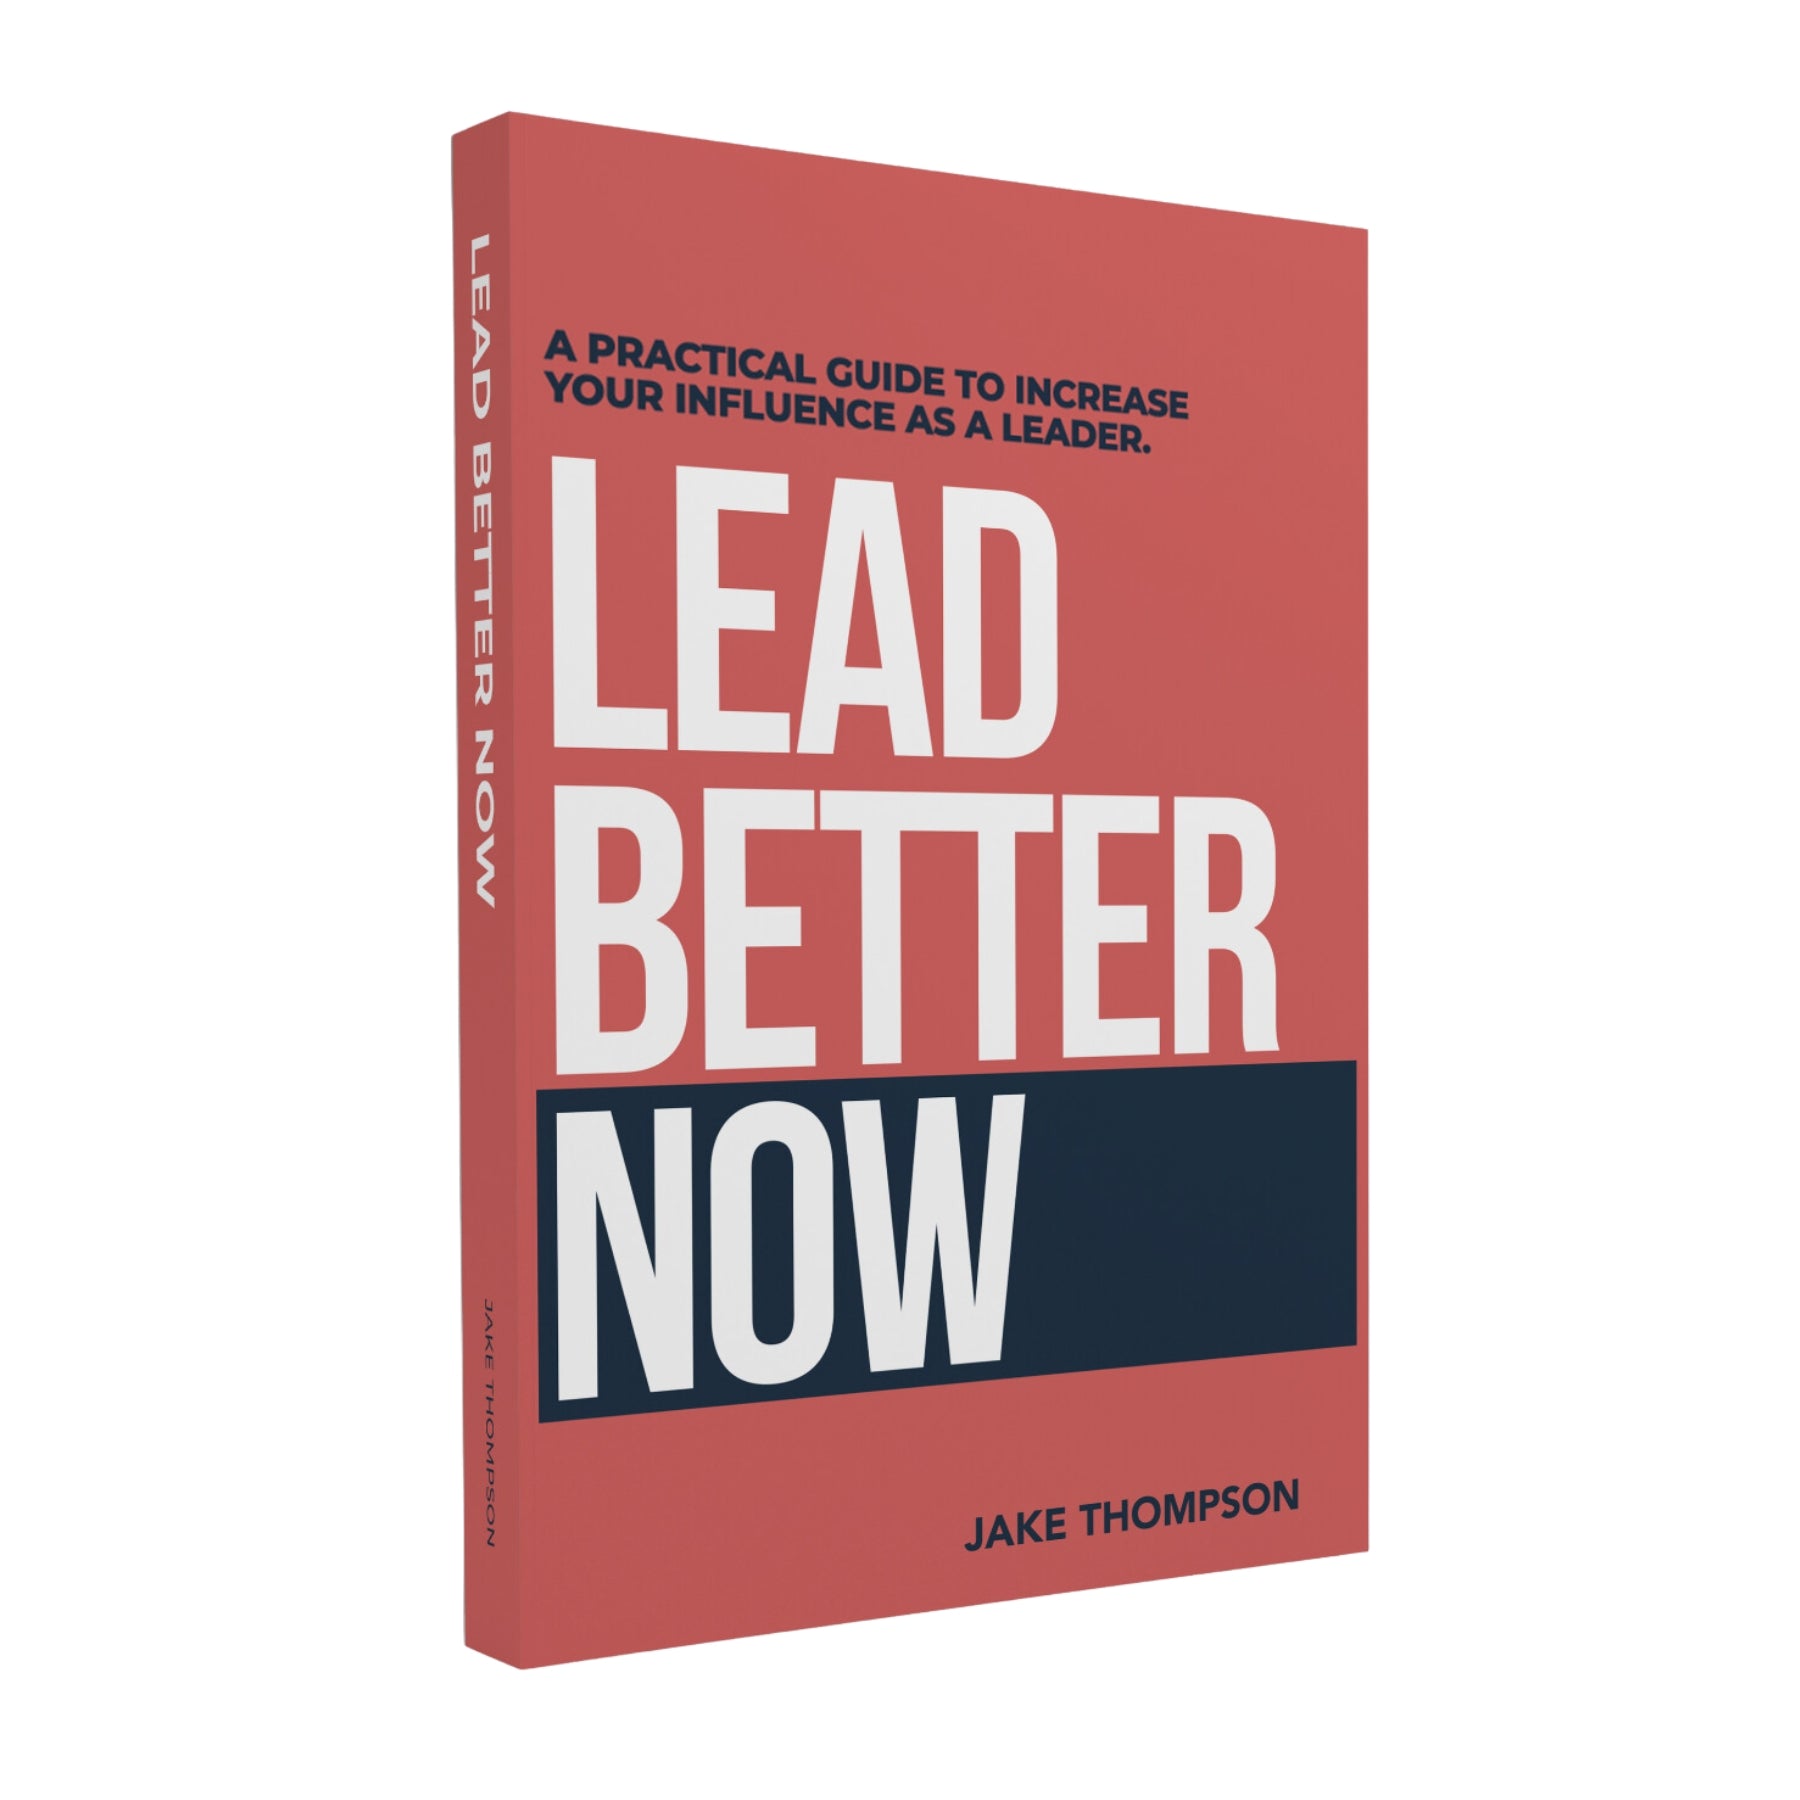 Lead Better Now